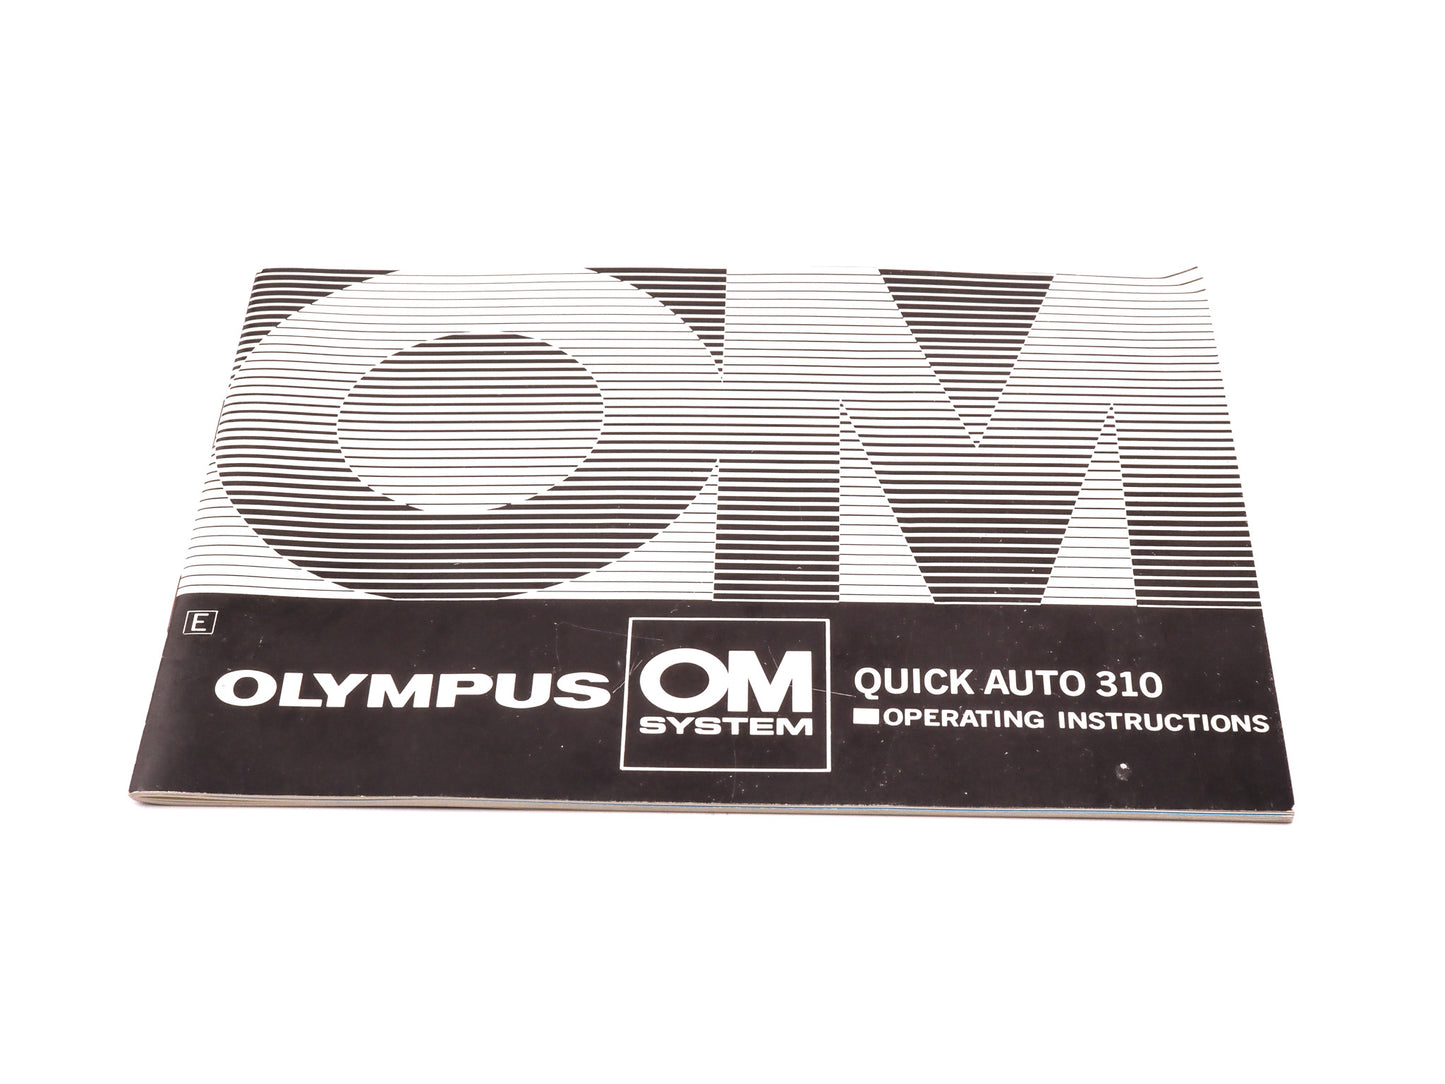 Olympus Quick Auto 310 Operating Instructions